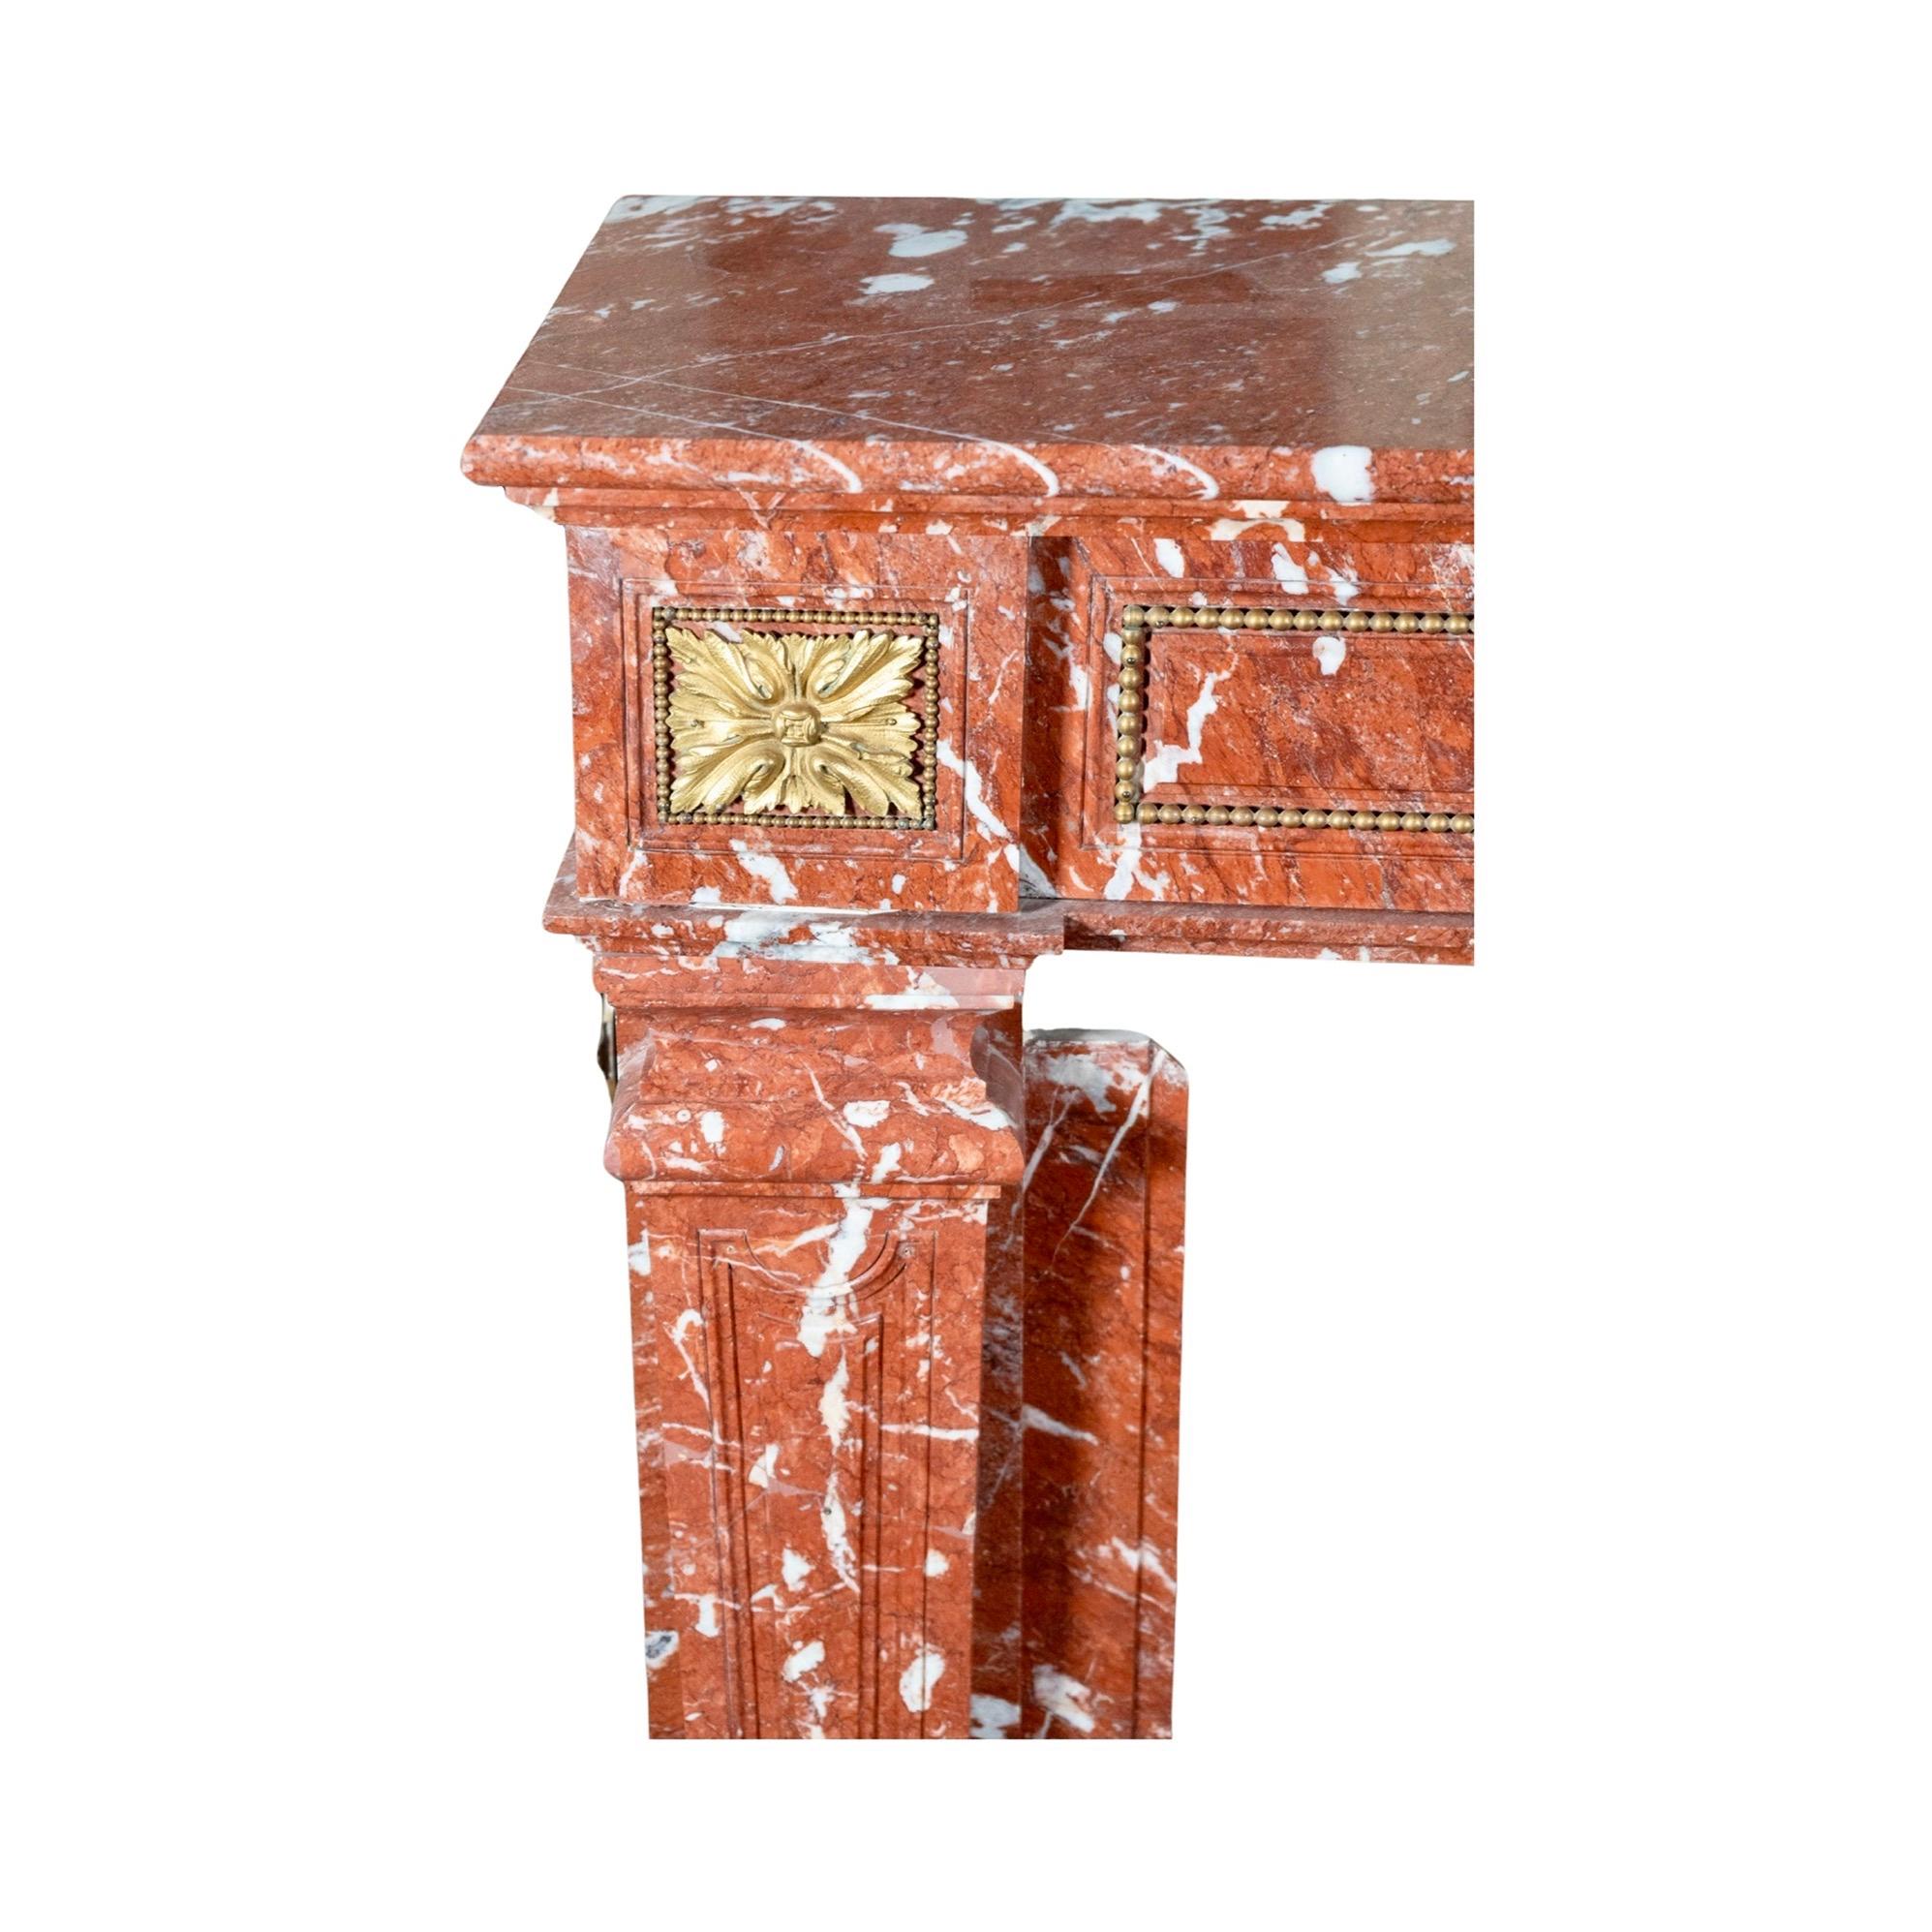 This antique mantel, made from rare Languedoc Red Marble, hails from France in the 1850s. It offers unique character and durability, along with a side vent for added functionality. Perfect for elevating your fireplace and adding a touch of classic